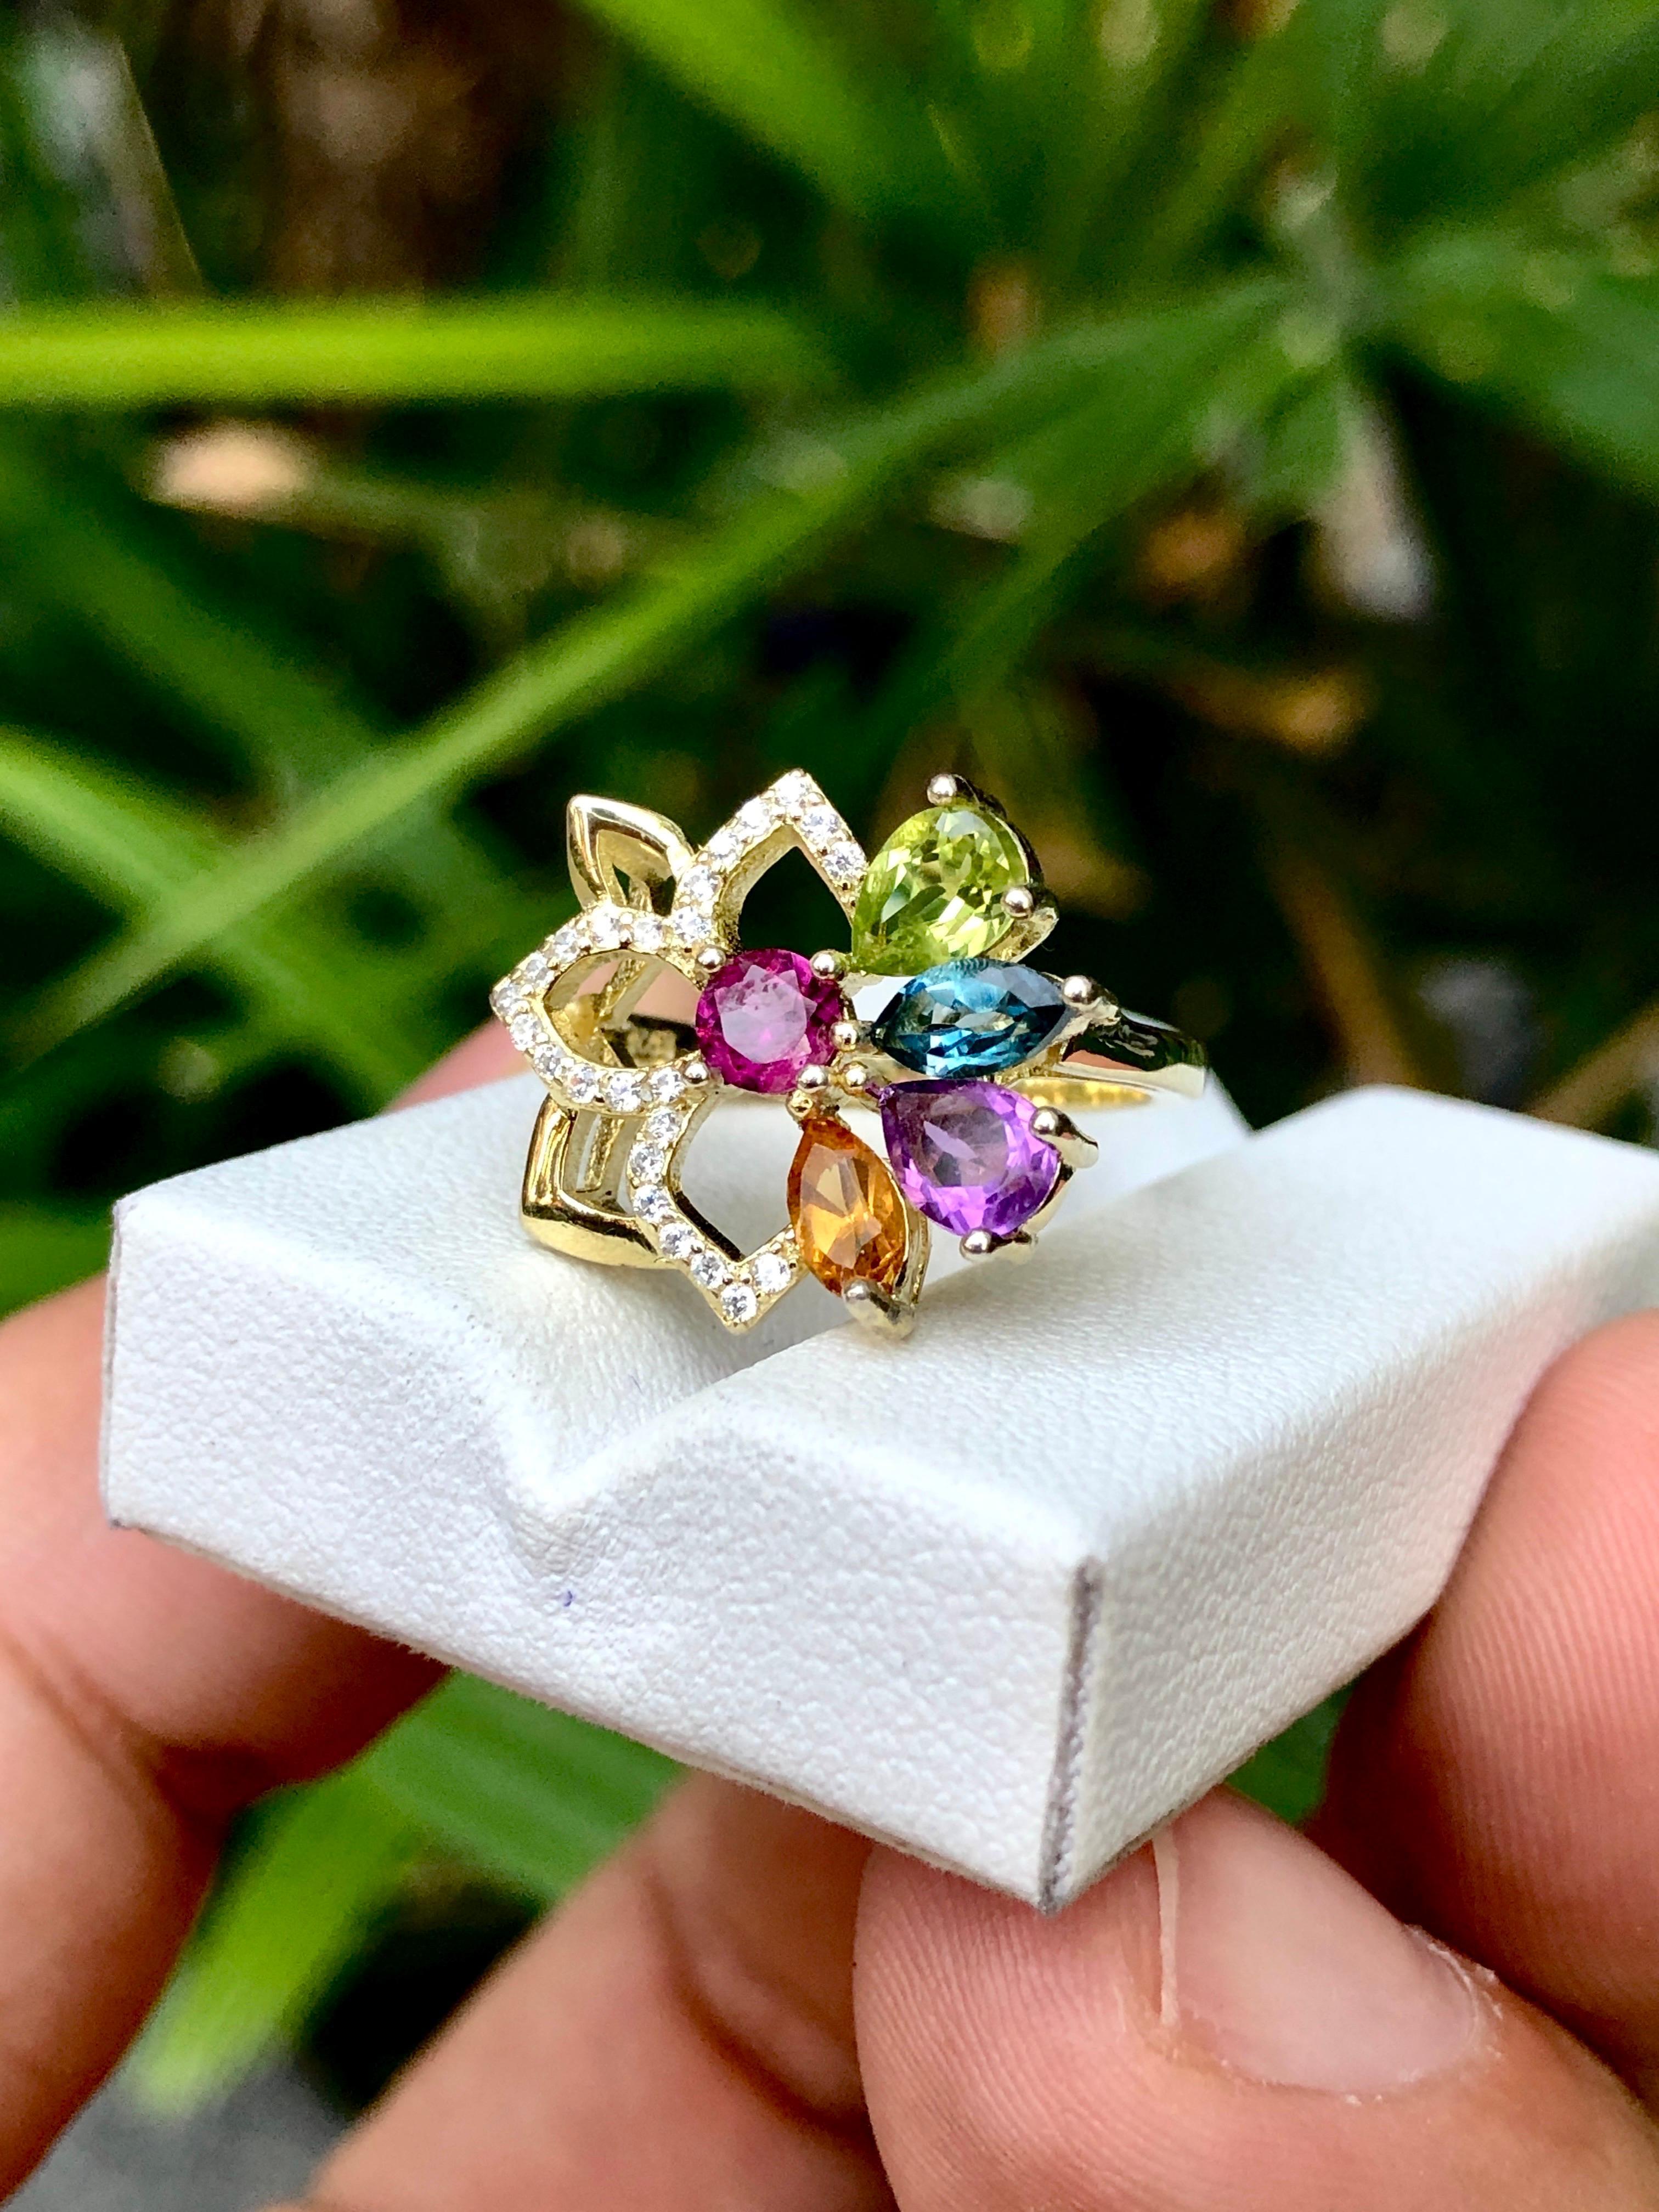 A stunning 925 silver ring adorned with exquisite citrine, London blue topaz, amethyst, and peridot gemstones, culminating in a regal crown of sparkling cubic zirconia. Elevate your style with this enchanting piece that captures the essence of